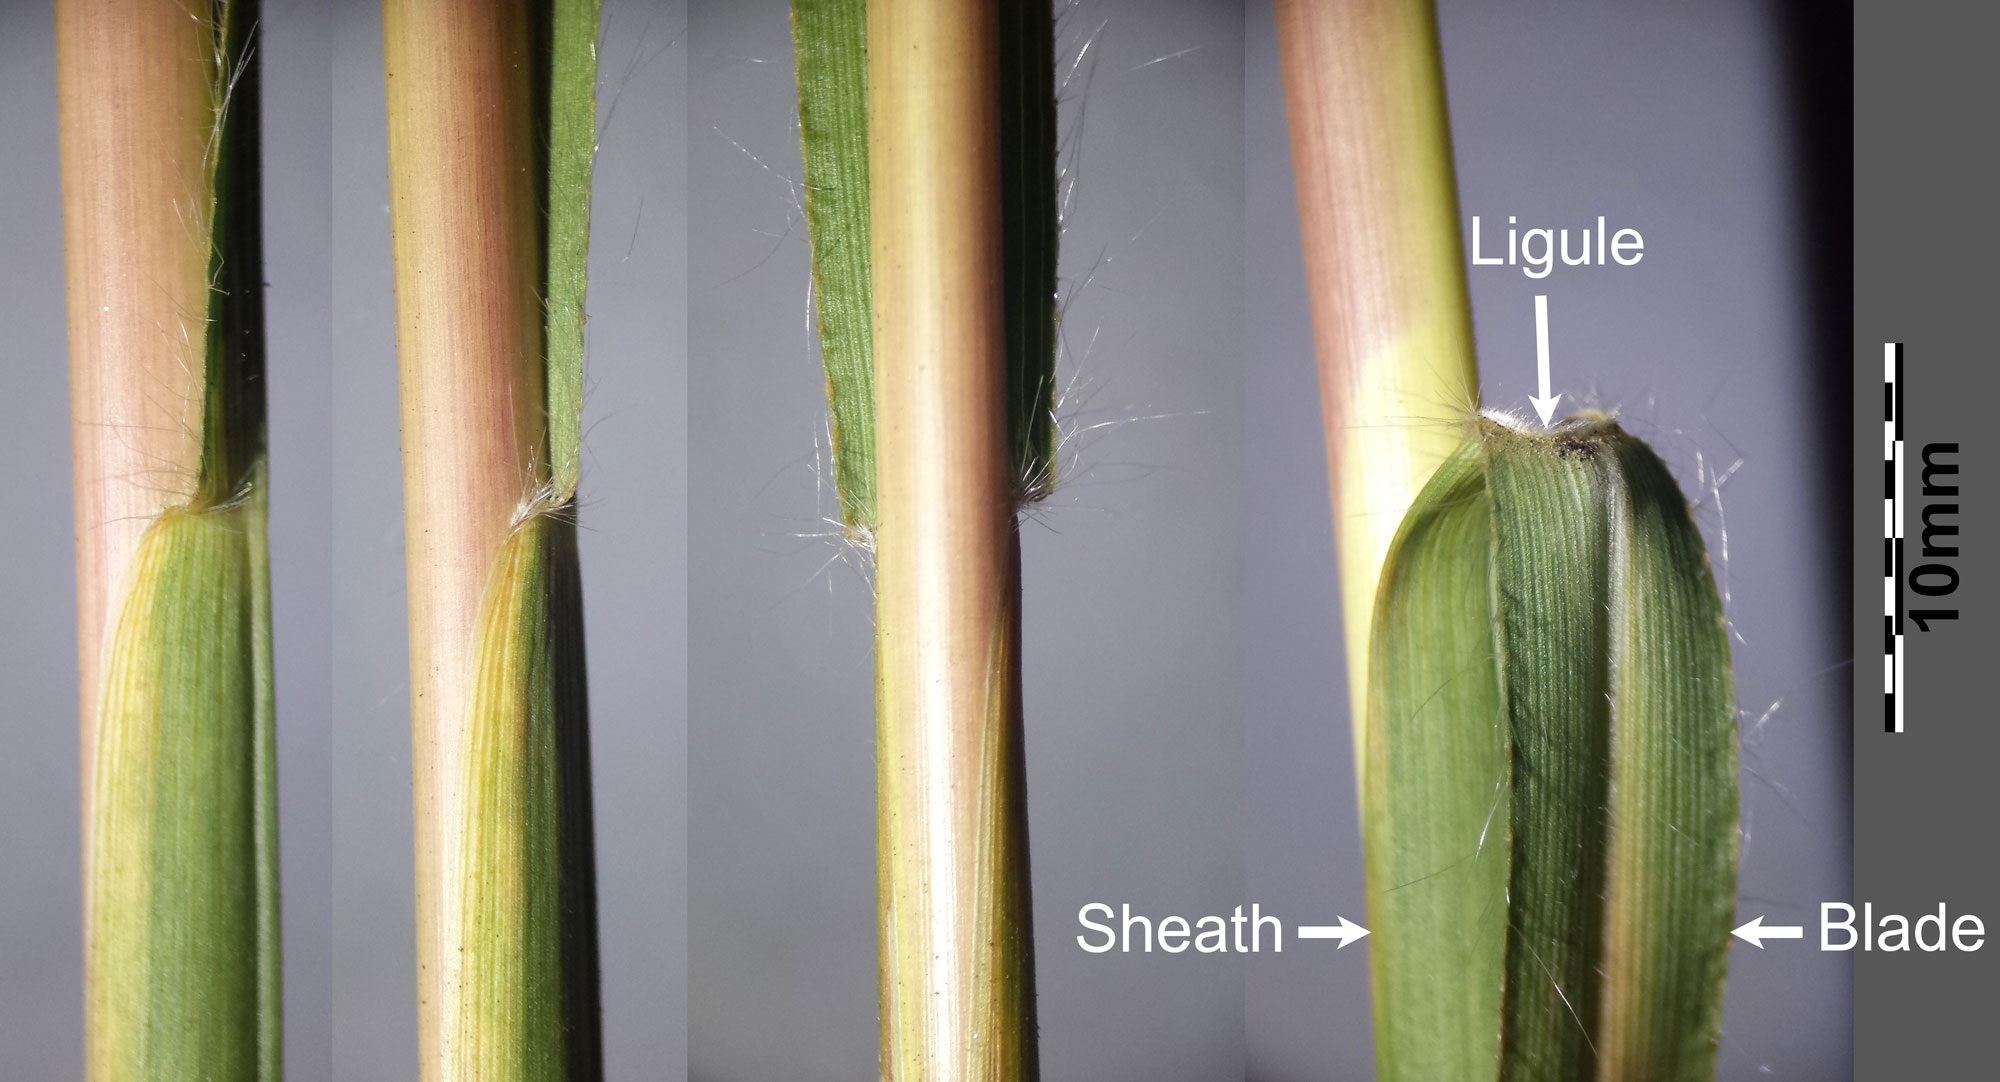 Photographs showing four views of the leaf blade, leaf sheath, and ligule of false beardgrass. The junction between the blade and the sheath is shown in three views in the three left panels. In the fourth panel, the blade has been pulled down and the sheath pulled slightly away from the stem to expose the short hairs of the ligule.